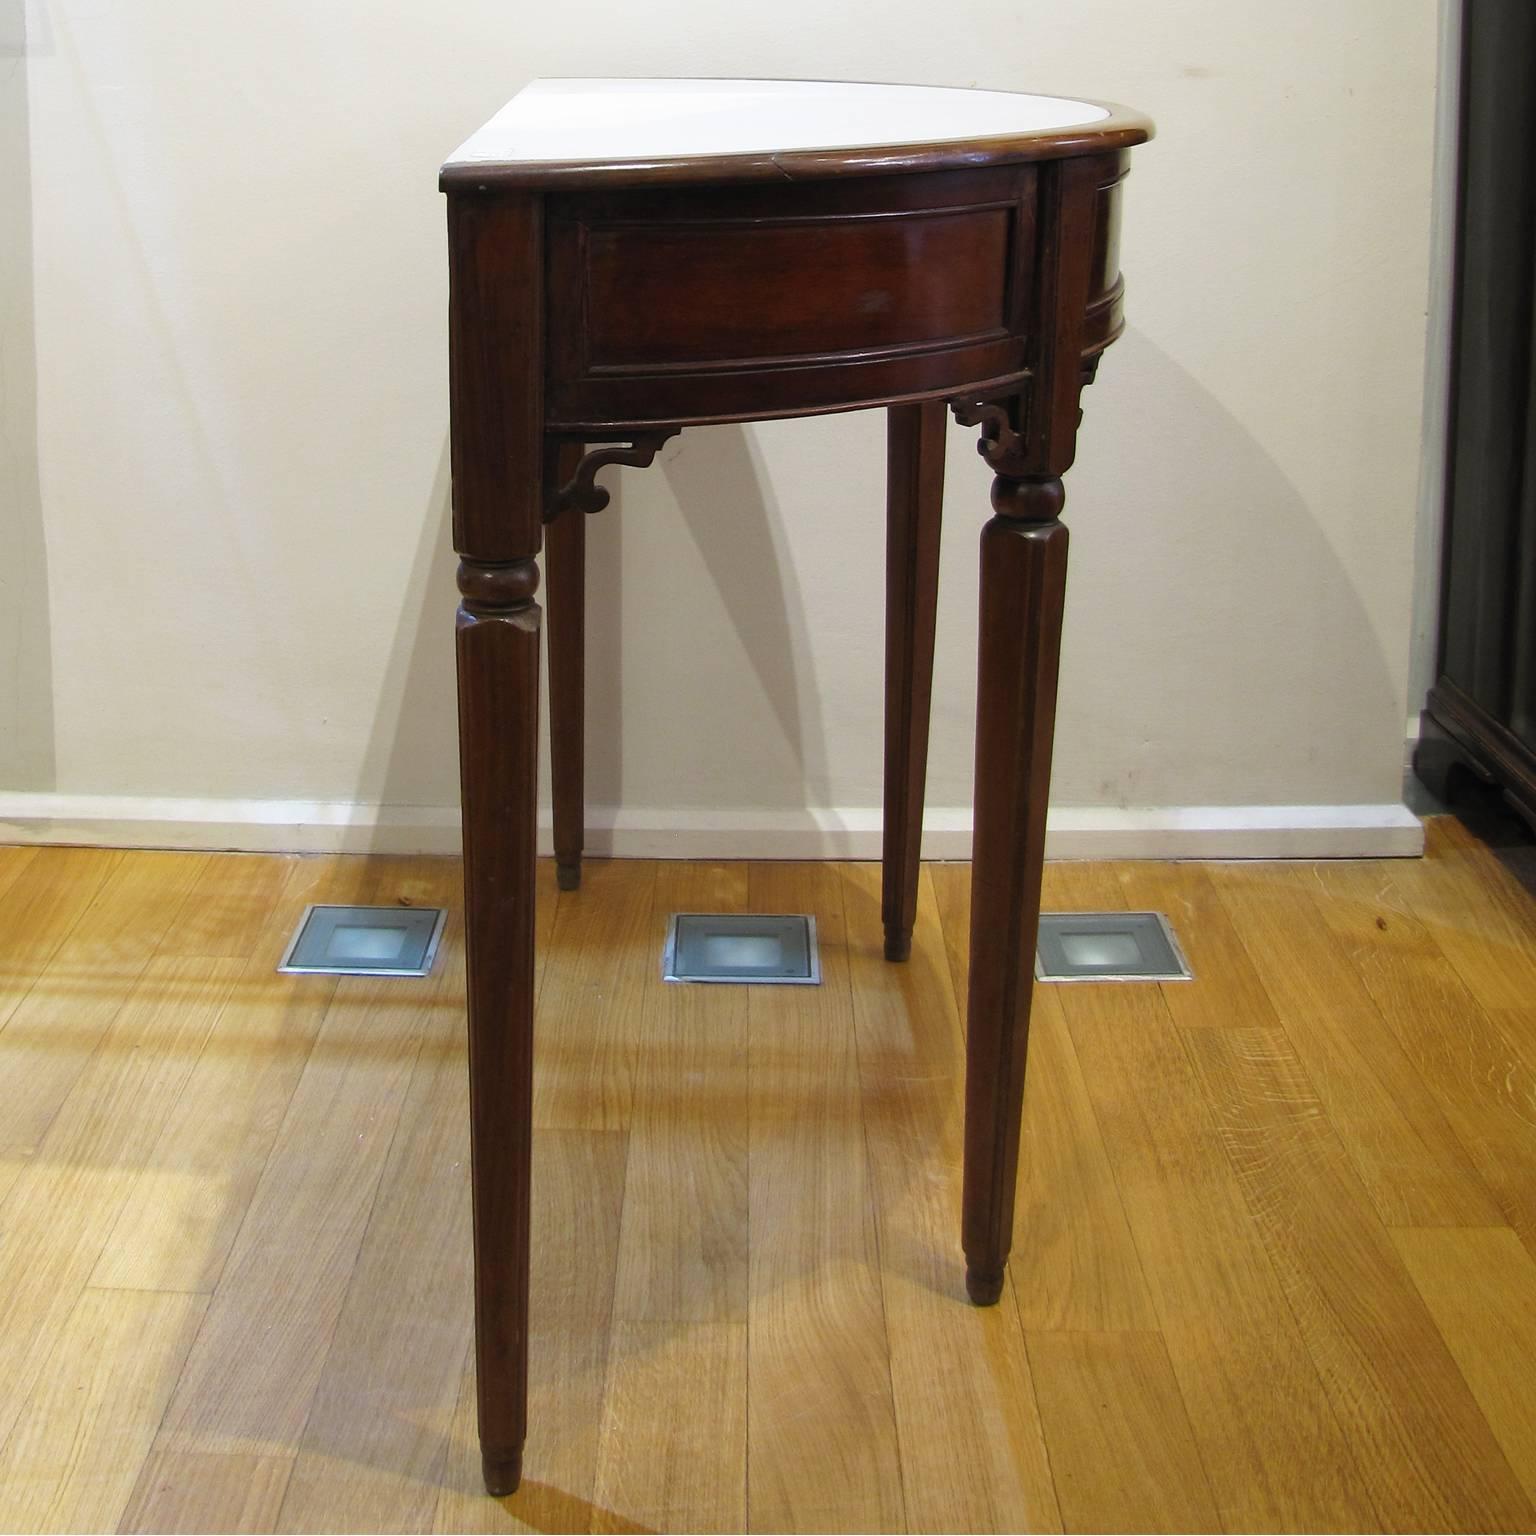 Carrara Marble Two Italian Mid-19th Century Side Tables in Mahogany Wood with White Marble Top For Sale